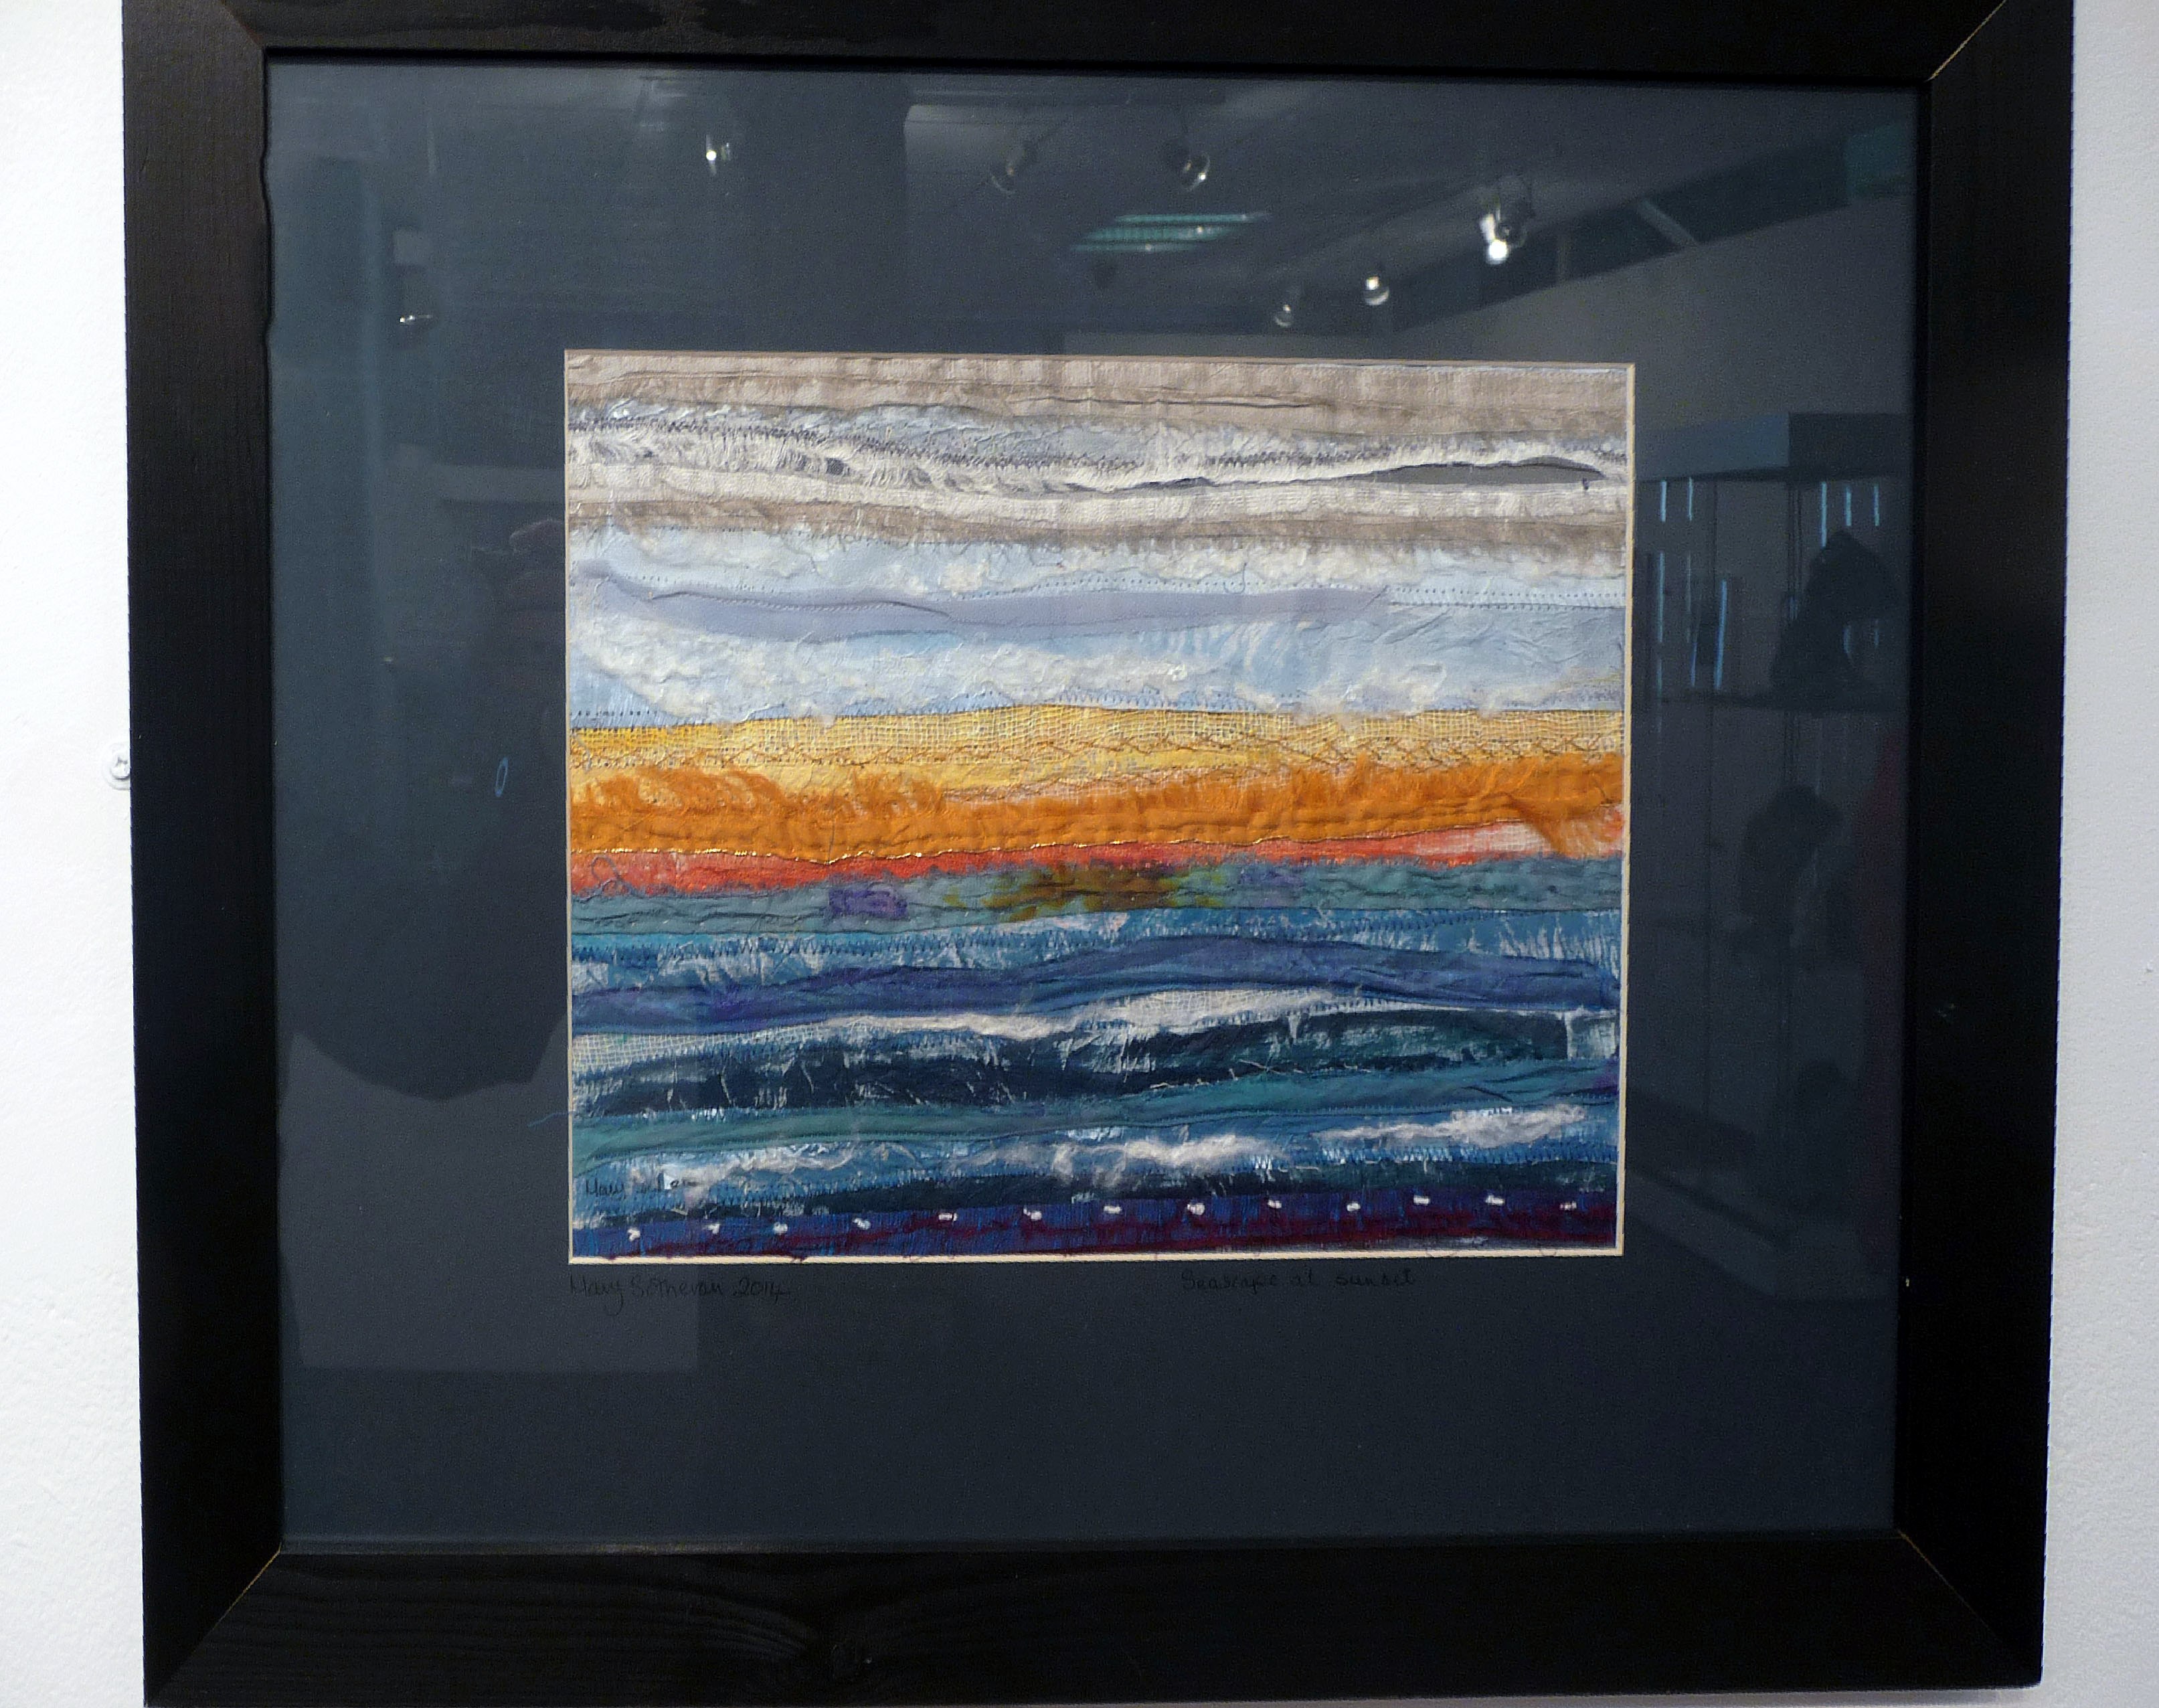 SEASCAPE AT SUNSET 1 by Mary Sotheran